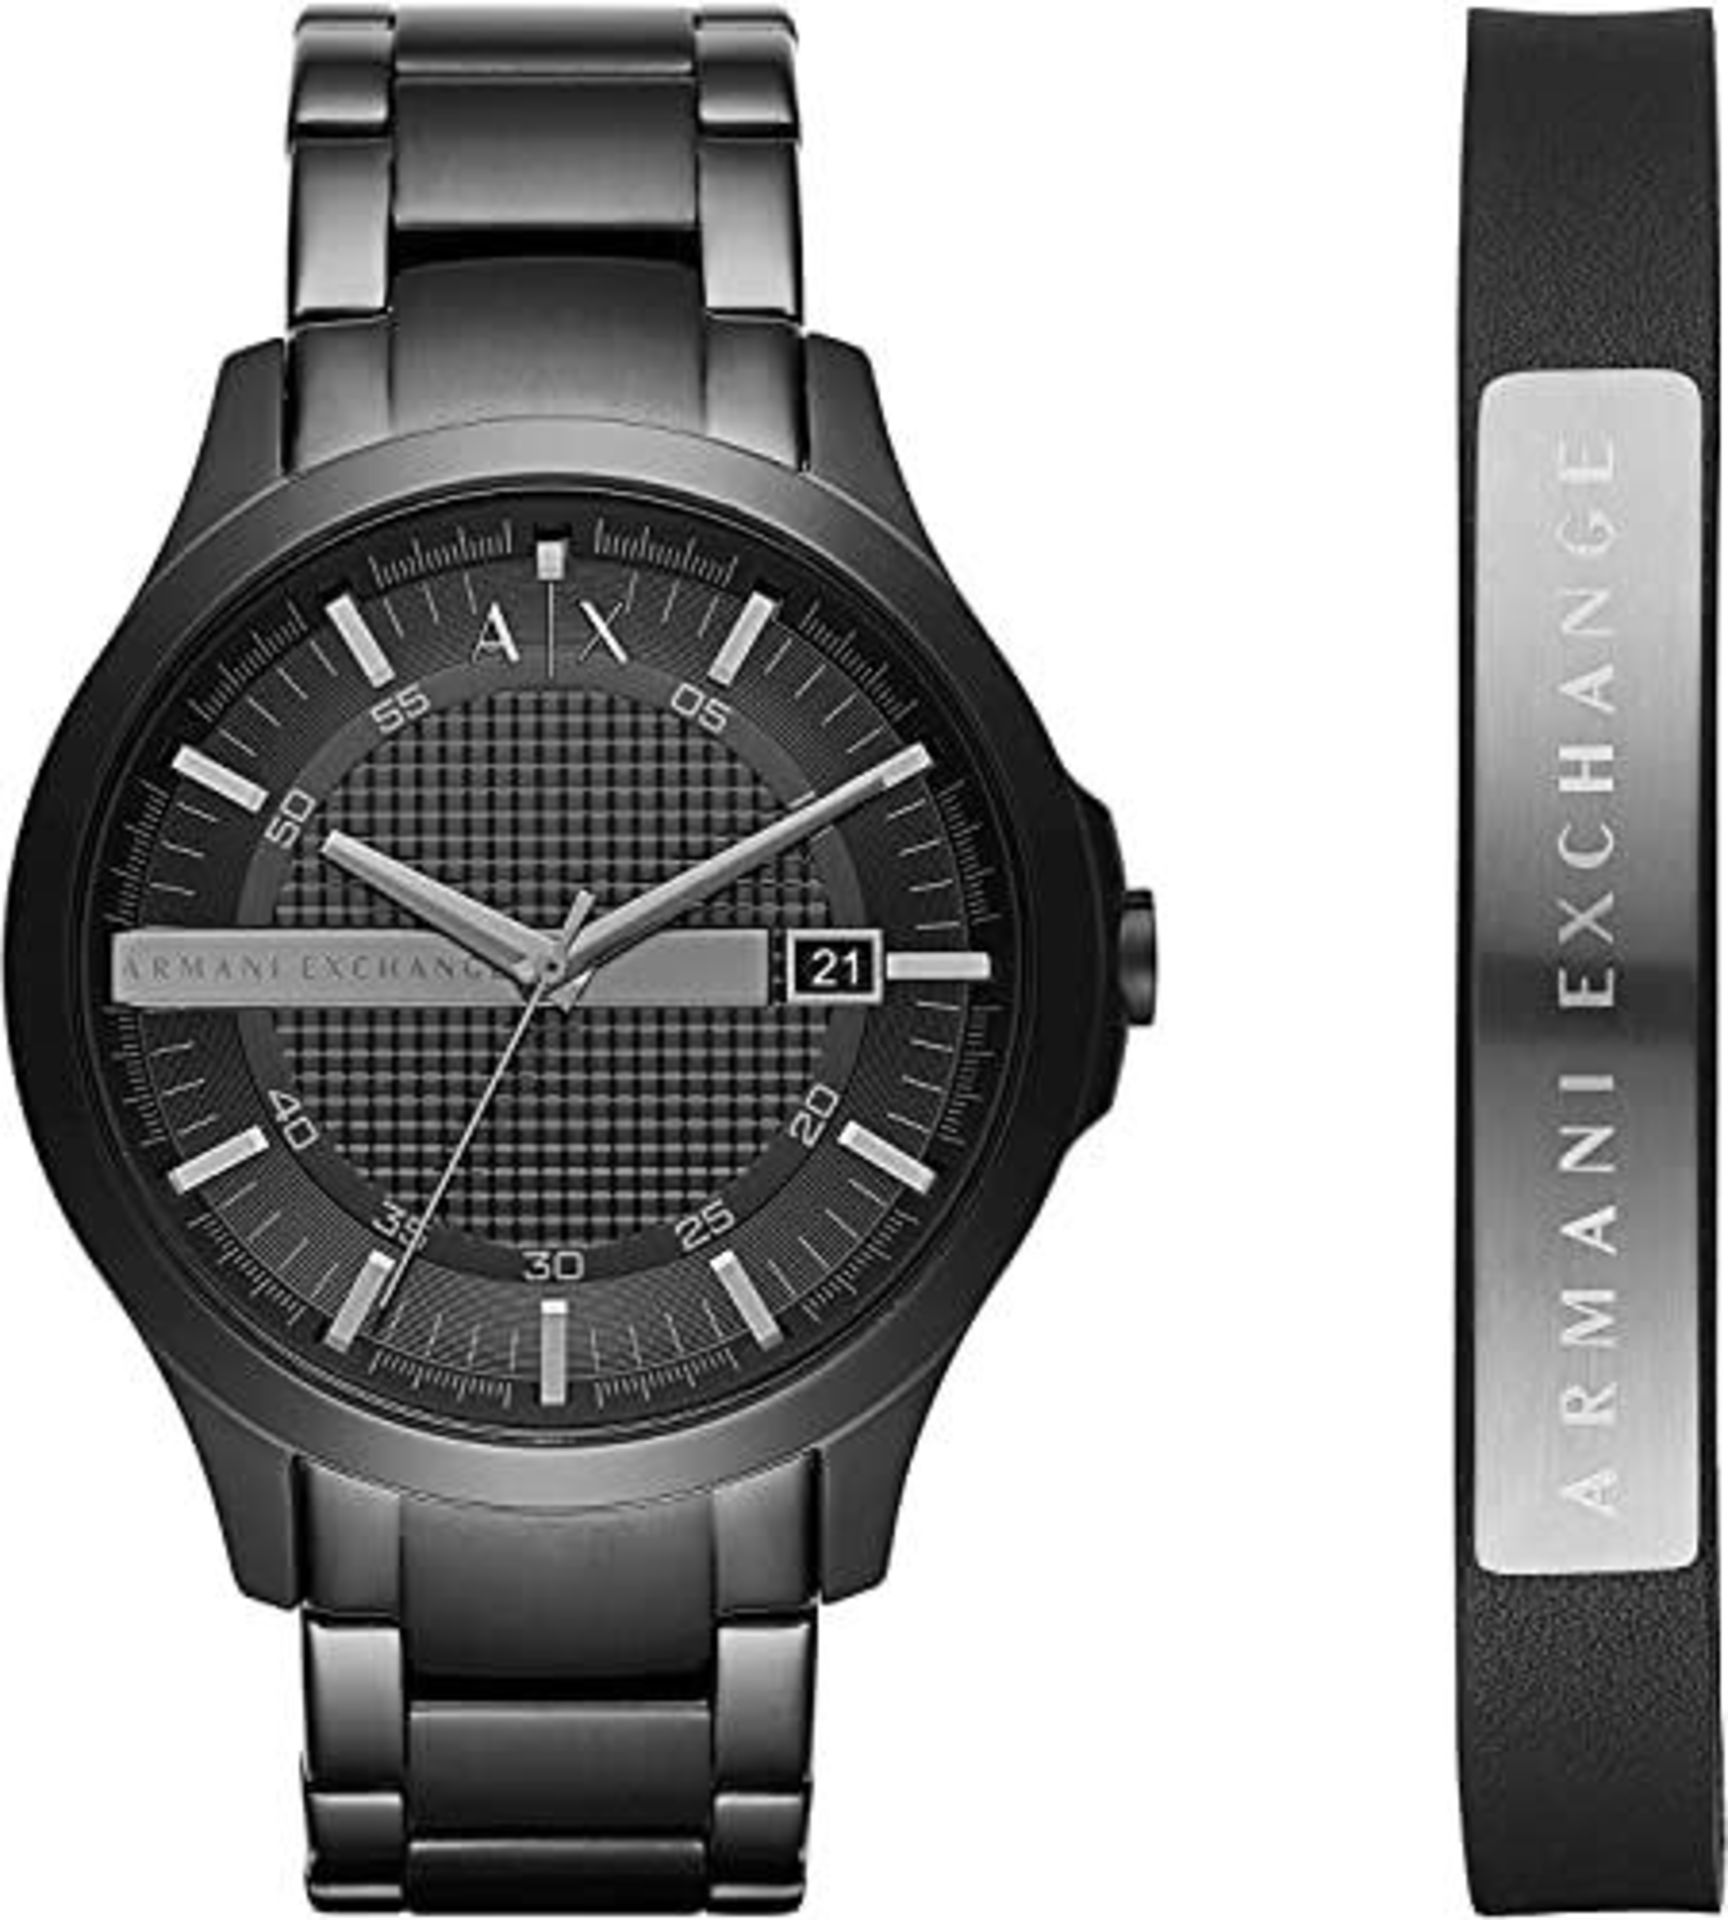 RRP £199.00 Armani Exchange Watch Set for Men, Three-Hand Date Movement Stainless Steel Watch and